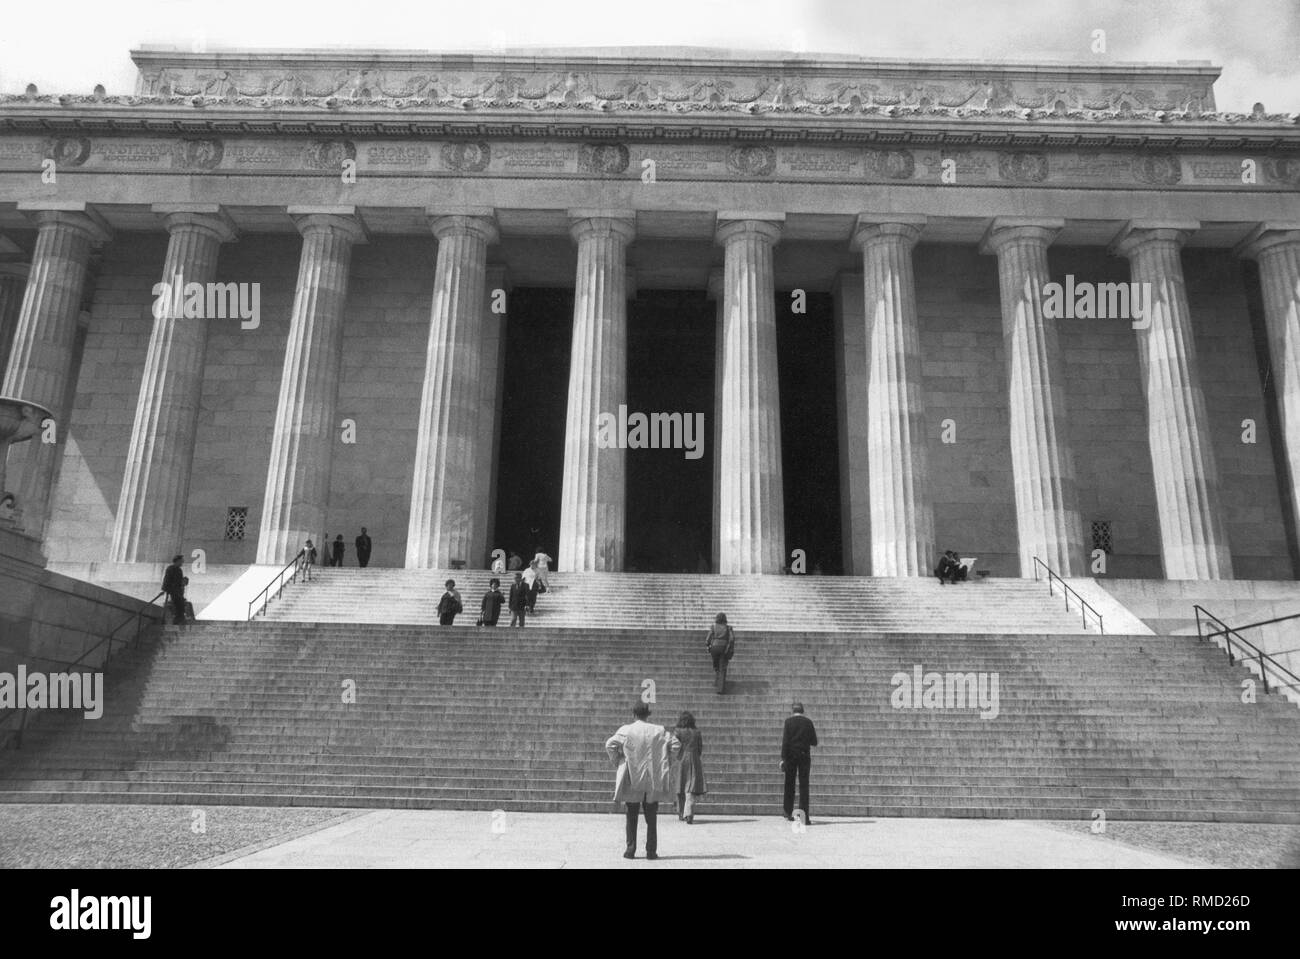 Visitors on the stairs of the Lincoln Memorial. The Lincoln Memorial was built between 1915-22 in honor of Abraham Lincoln. It is modeled after a Greek temple supported by 36 Doric columns, one for each of the US states that existed in Lincoln's time. Stock Photo